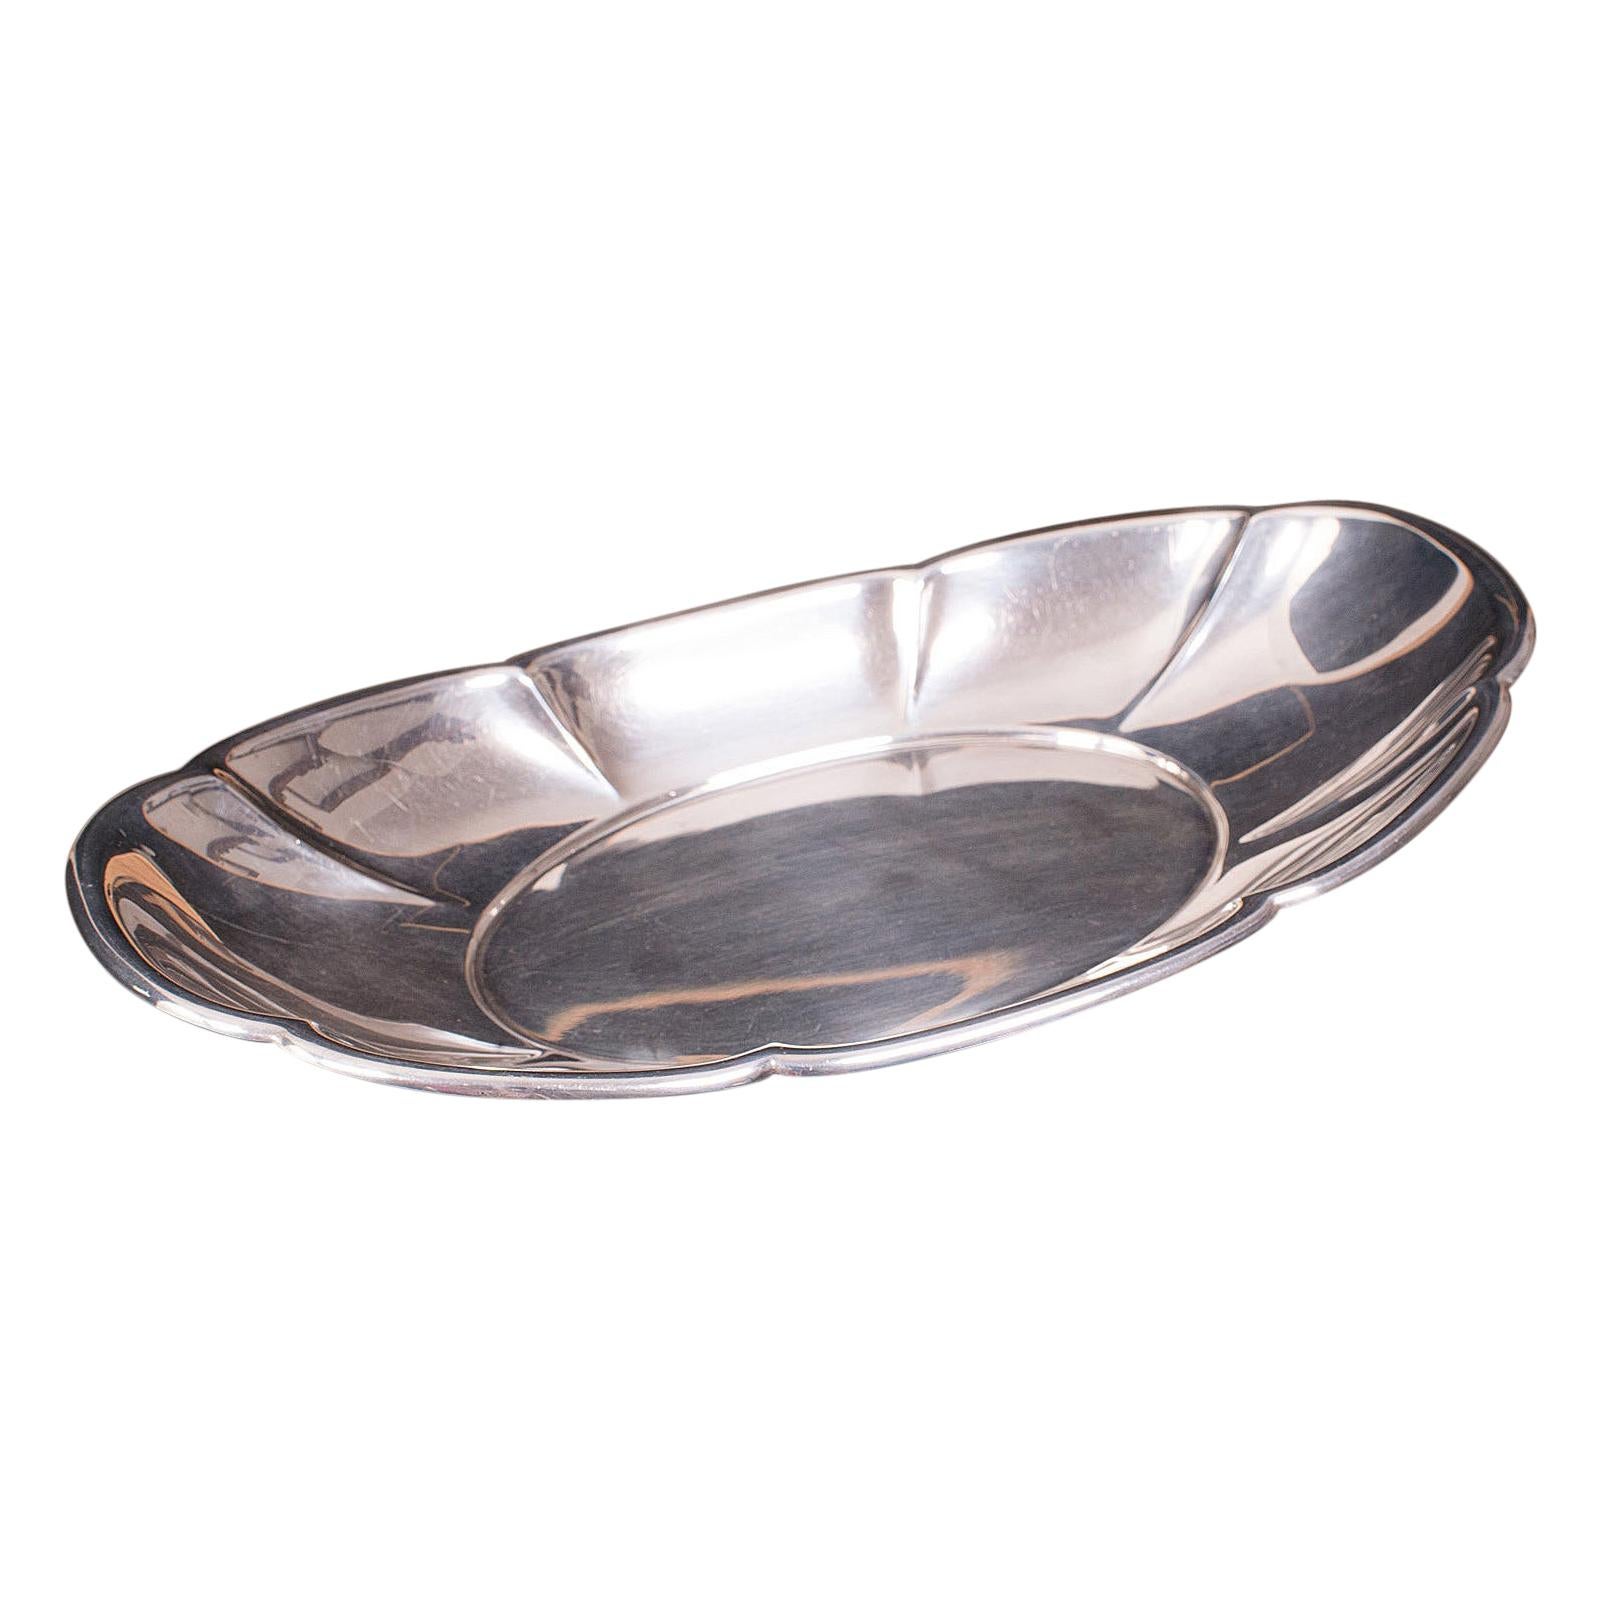 Antique Grape Dish, American, Sterling Silver 925, Cartier, Early 20th Century For Sale